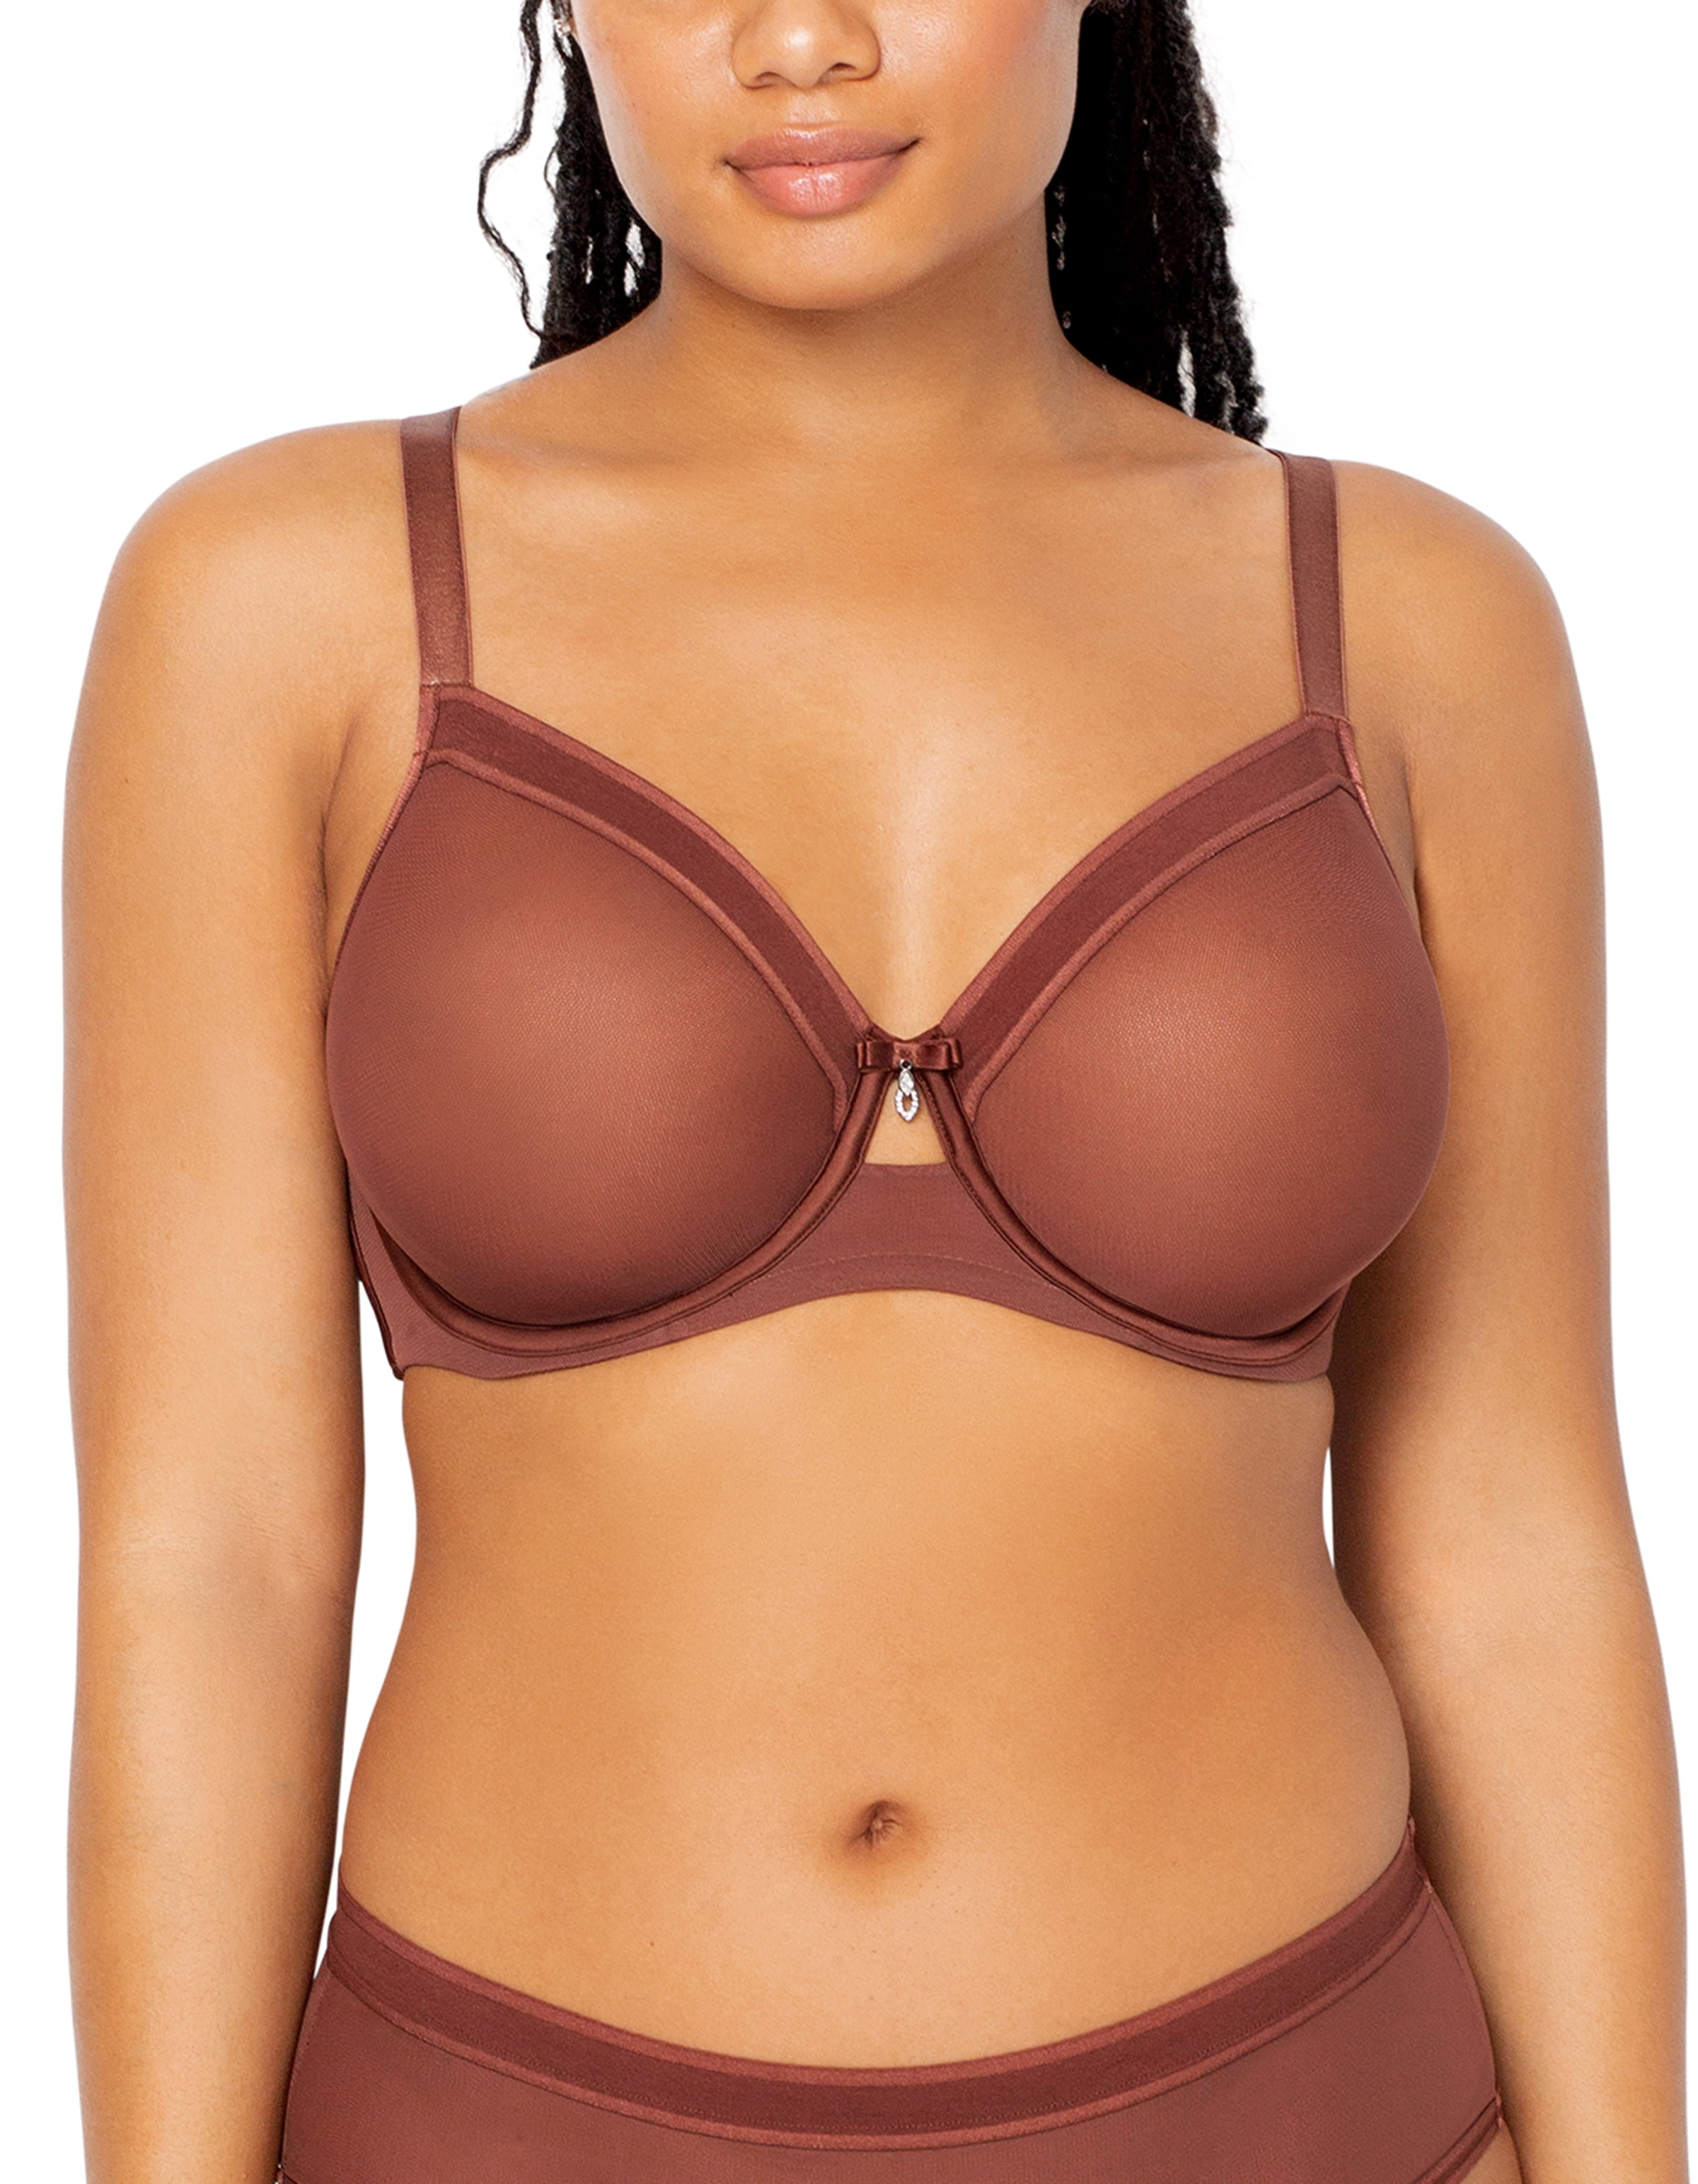 Curvy Couture Women's Plus Sheer Mesh Full Coverage Unlined Underwire Bra  Appletini 42DD